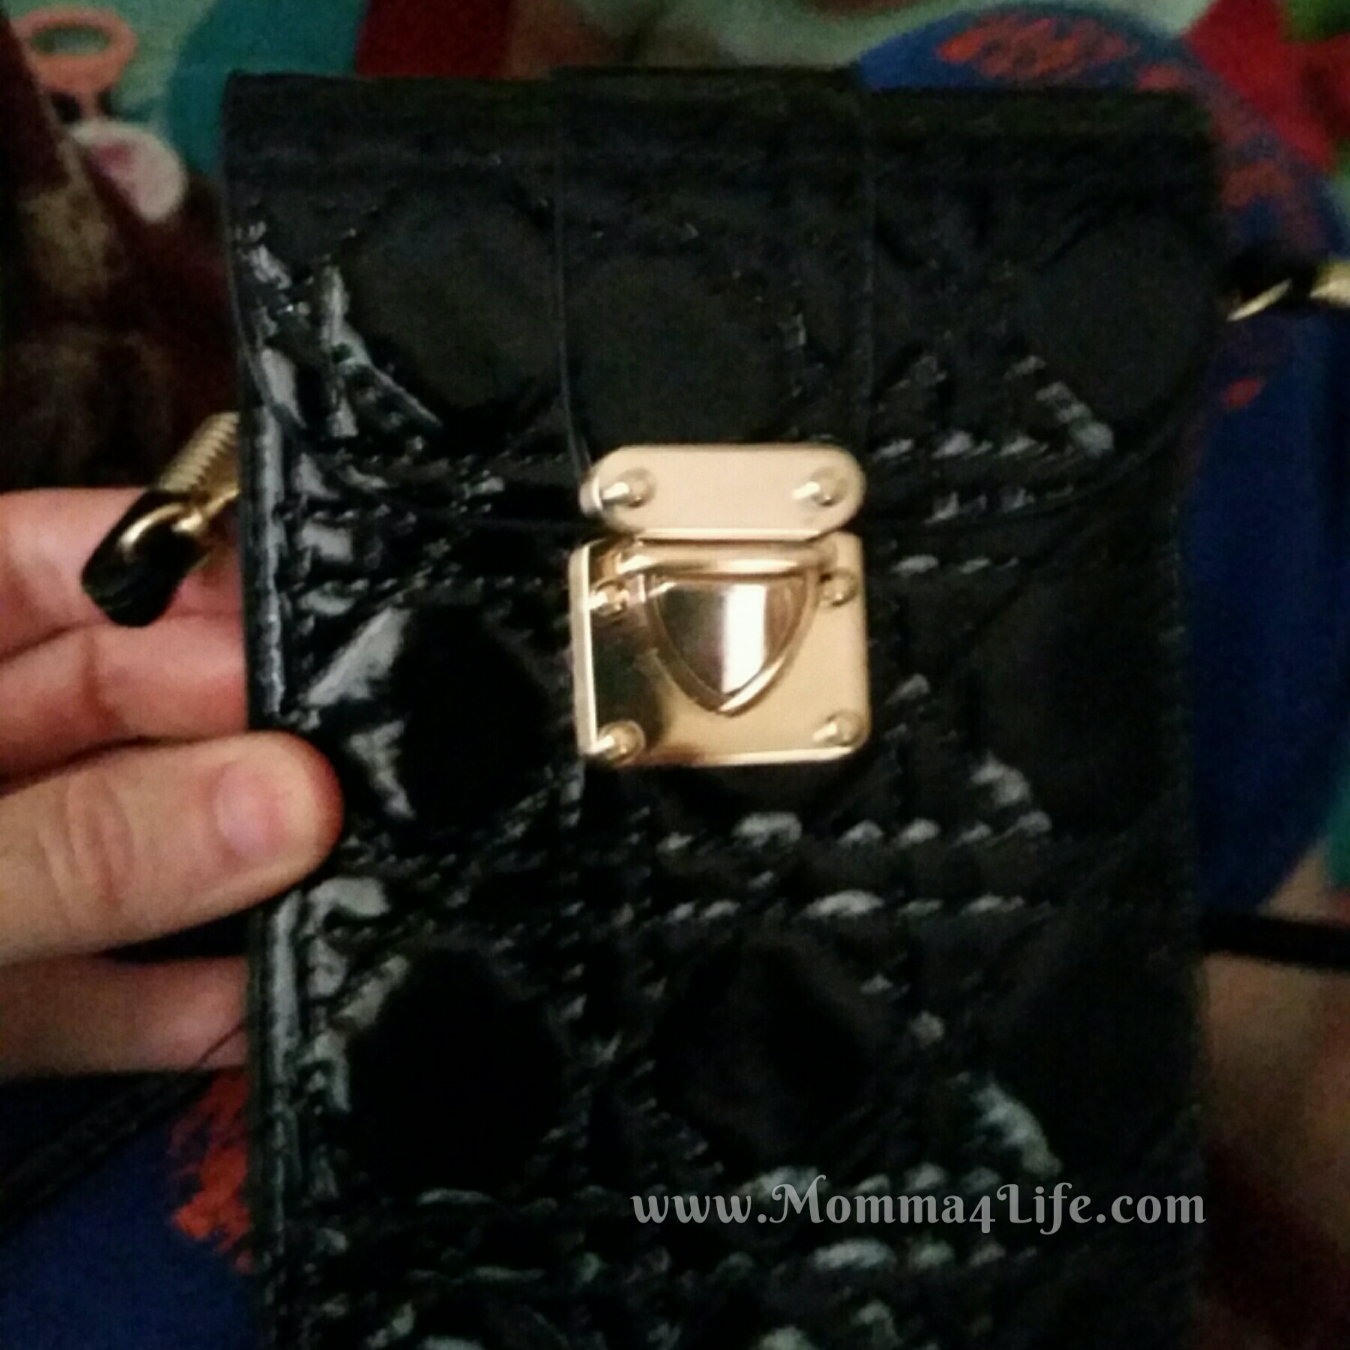 Cell Phone Case Purse Review - Momma4Life